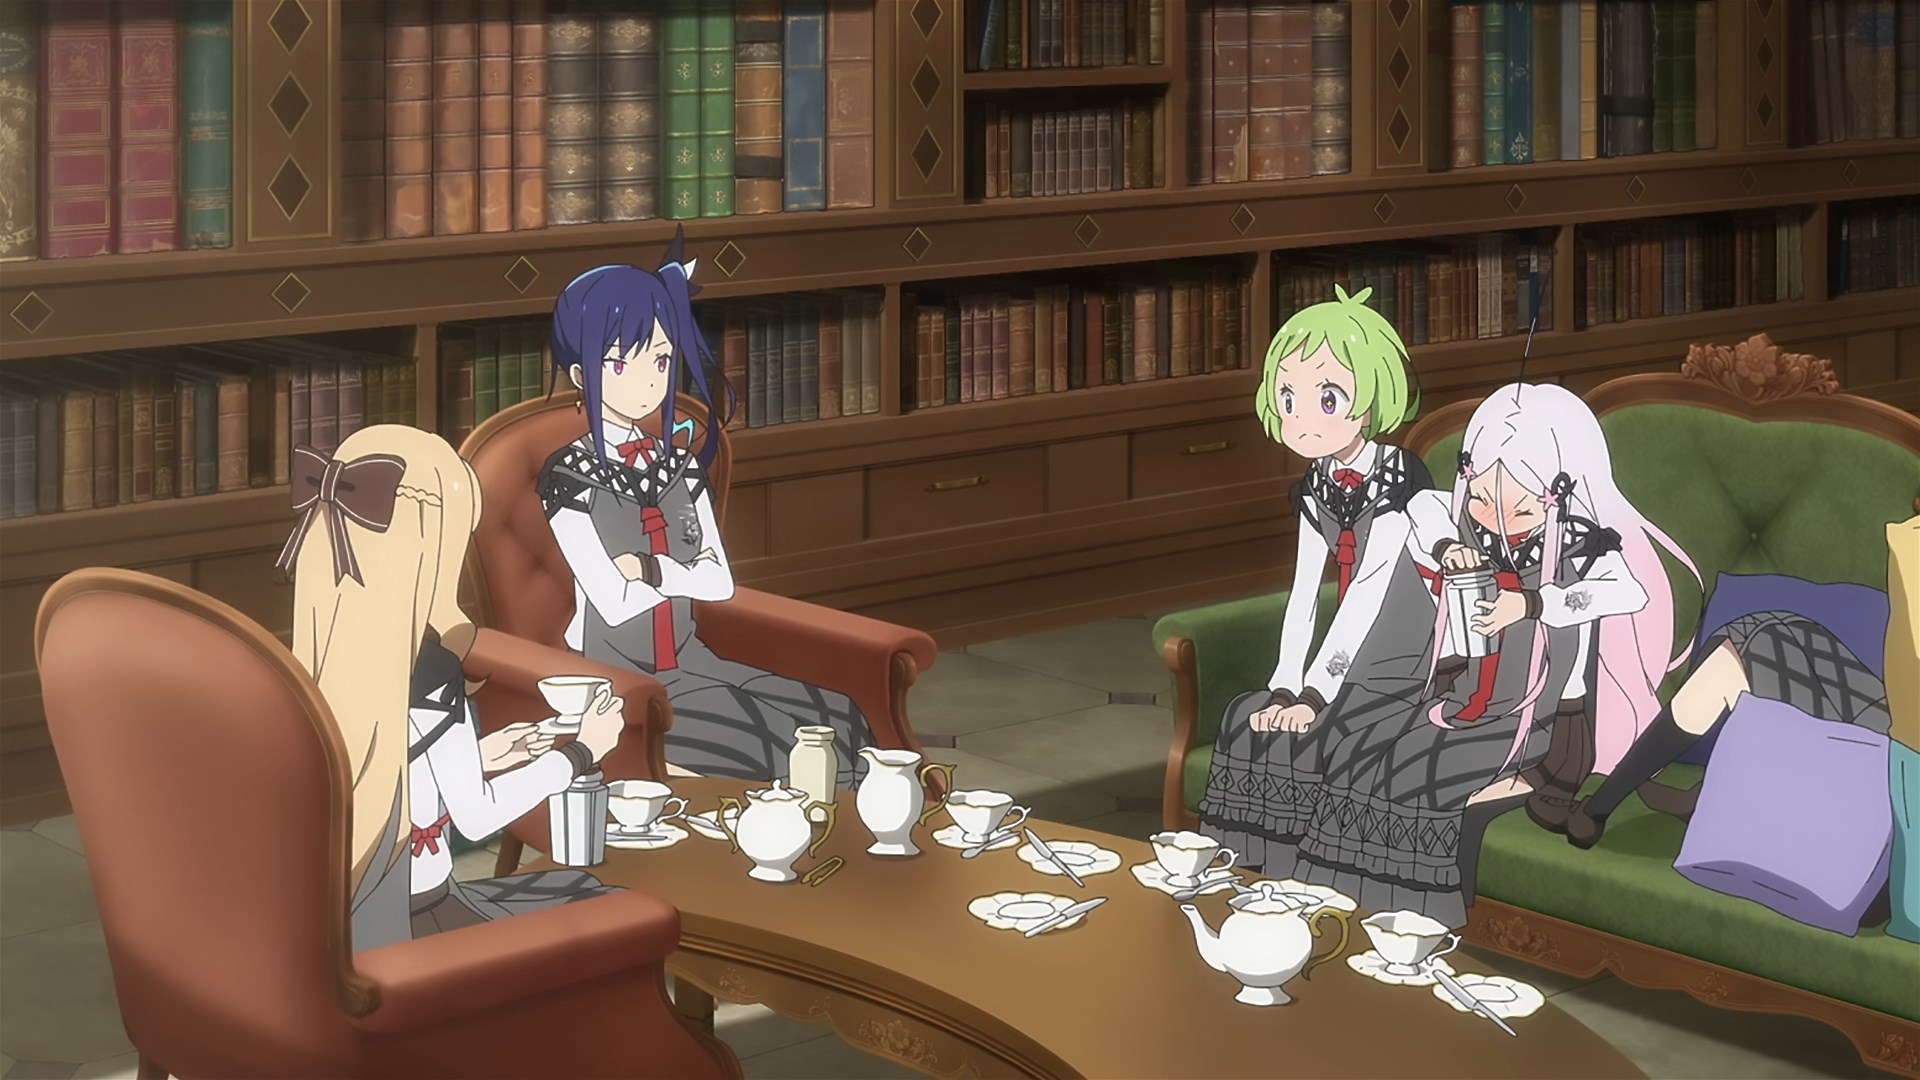 Five cute girls having a tea party. One is struggling to open a jar